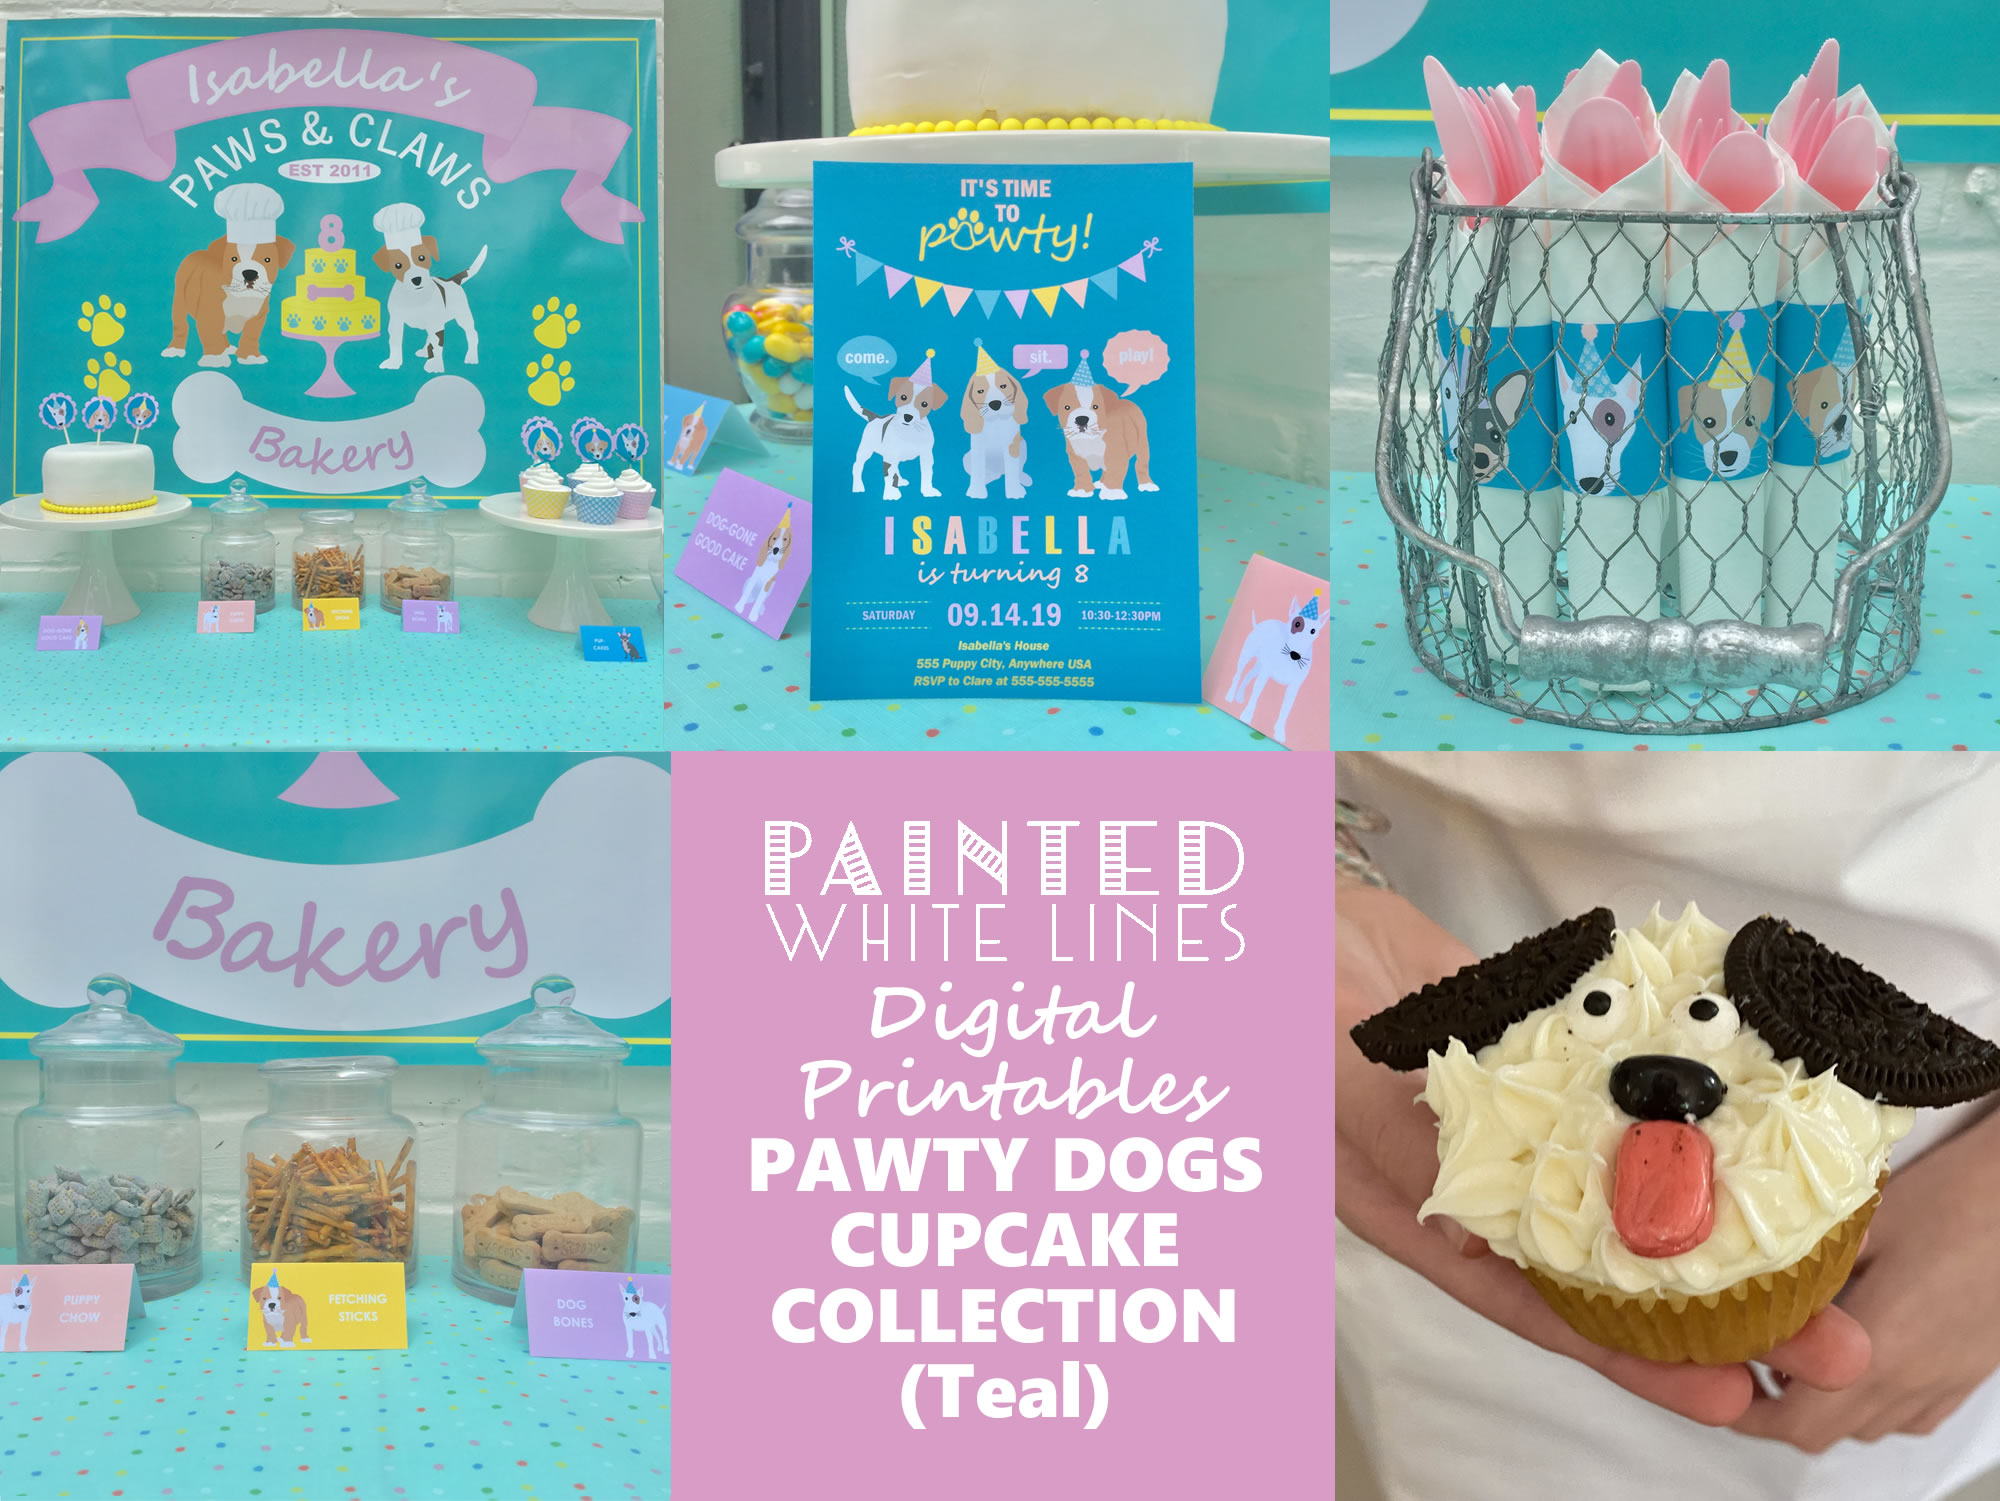 Paws and Claws Cupcake Decorating Party (Puppy Dog Teal)